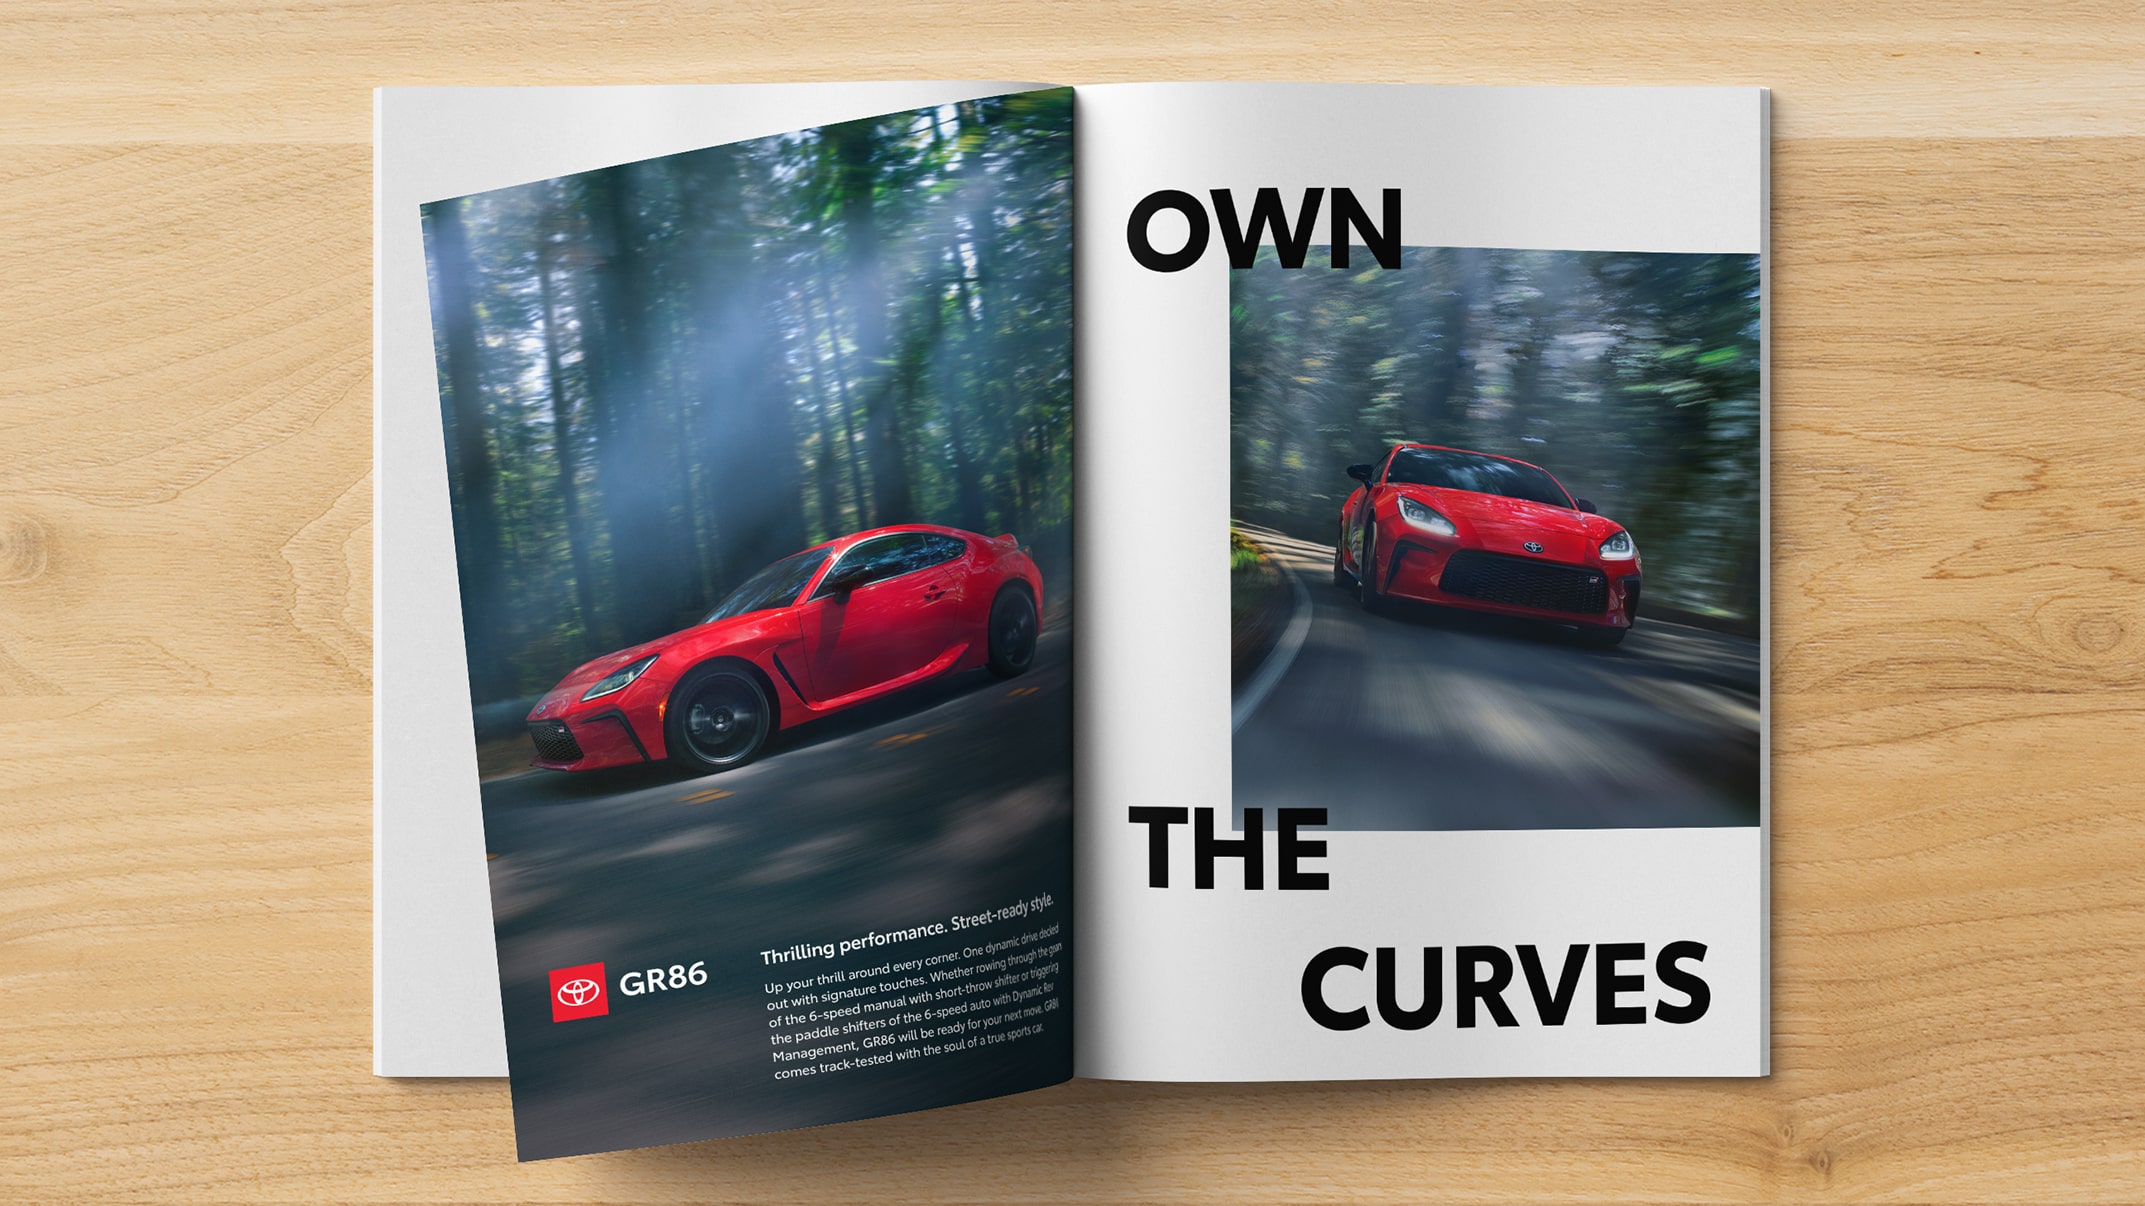 A slider divides an image of a Toyota ad in a magazine. The slider moves back and forth to show a layout grid of the ad and then the finished layout with imagery.